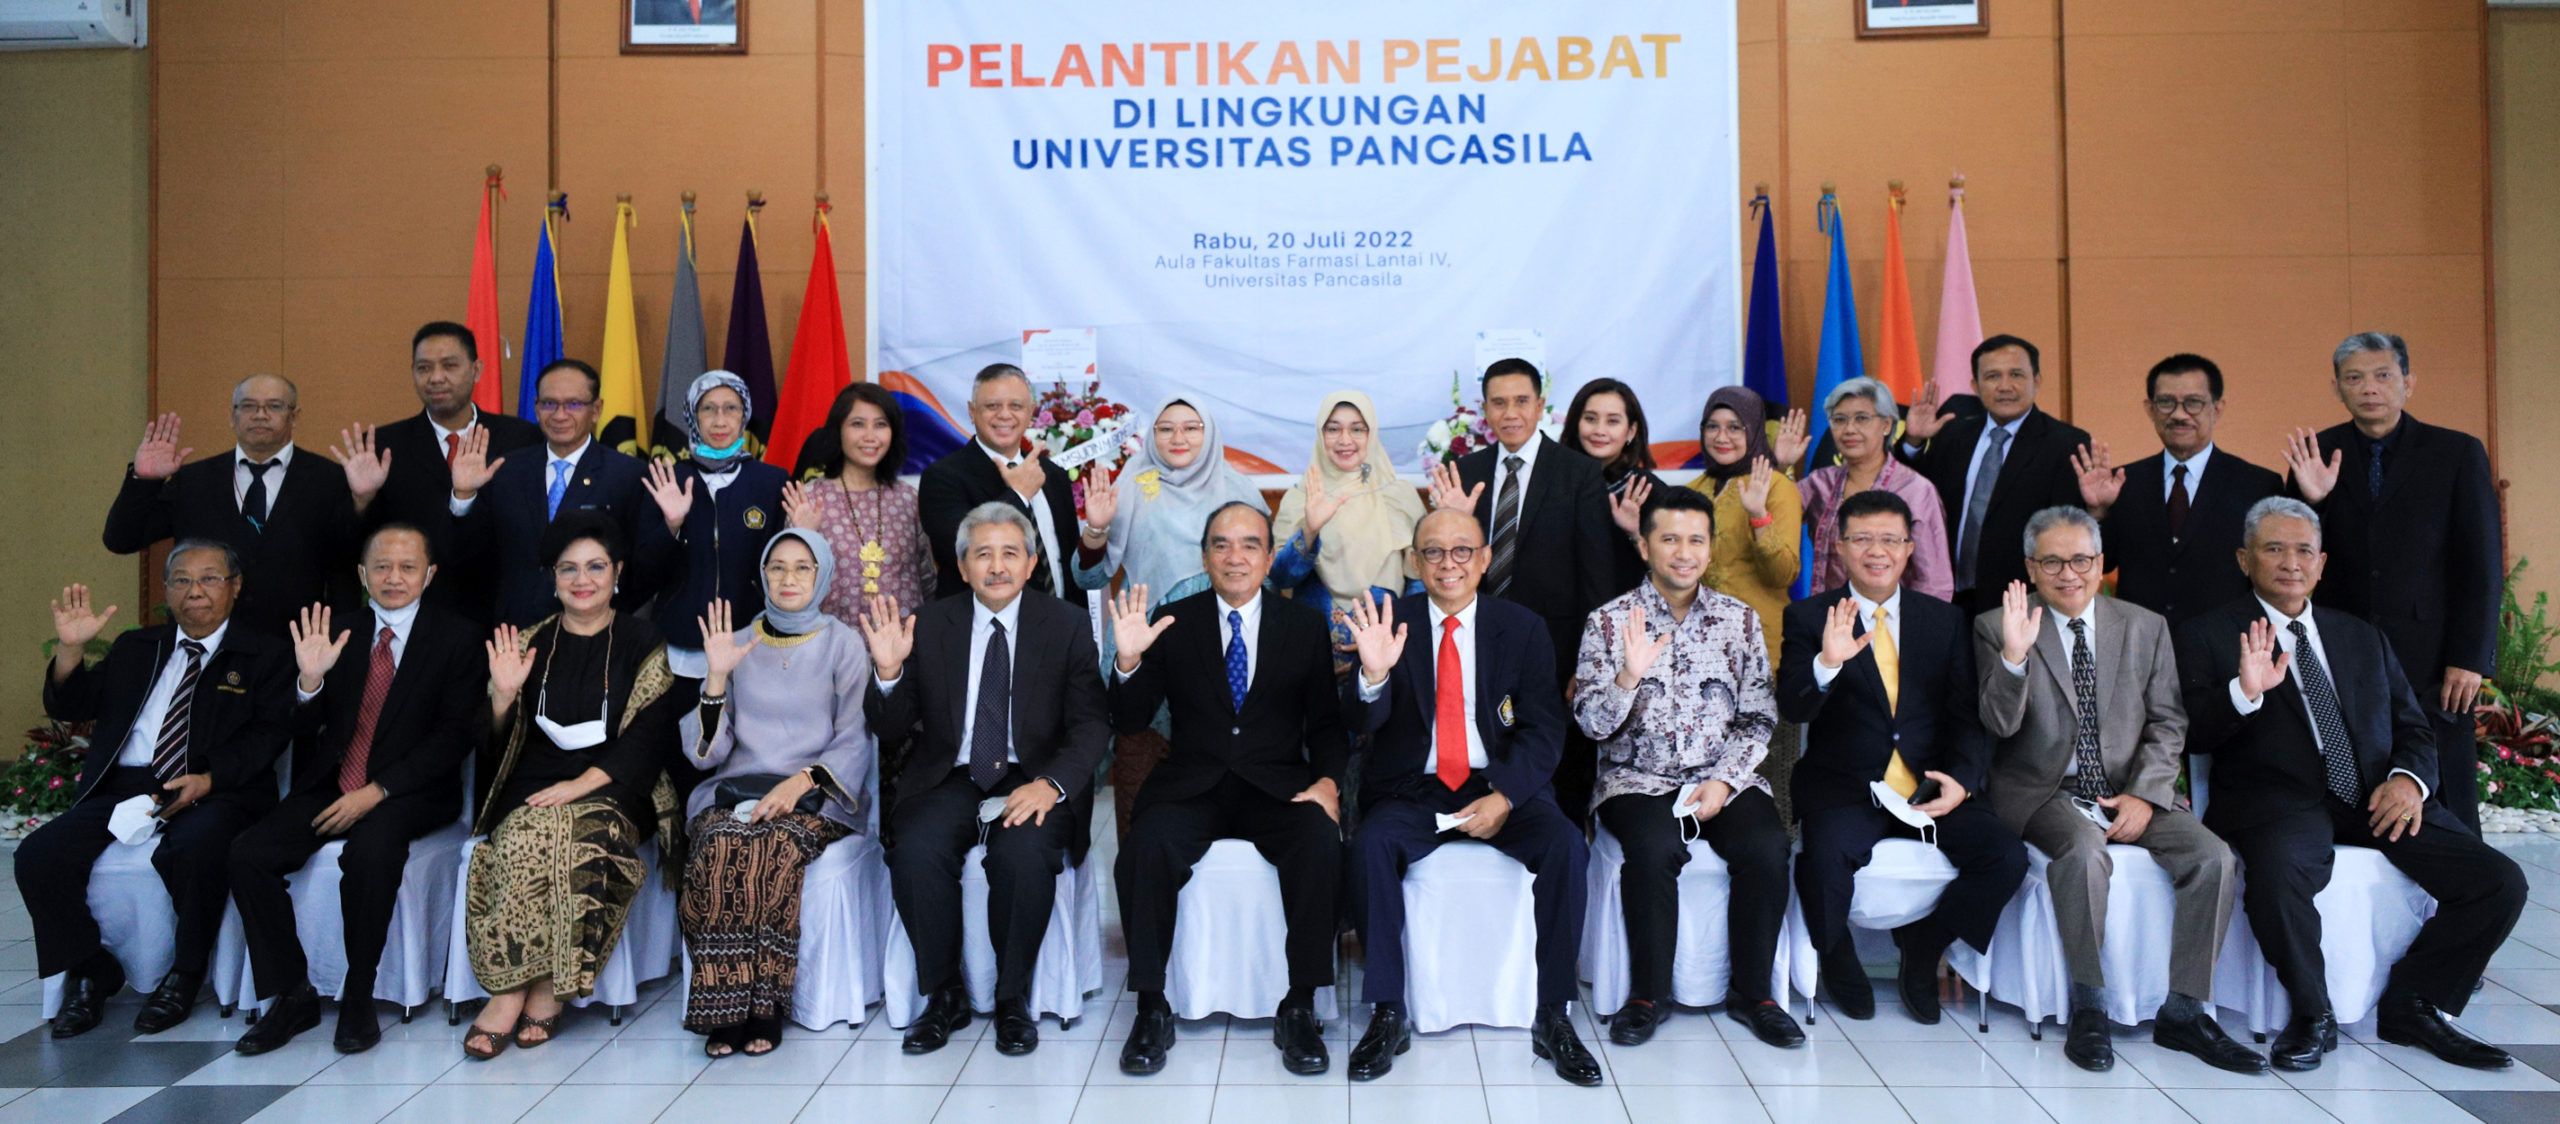 Inauguration of the Dean of the Faculty of Pharmacy, Pancasila University